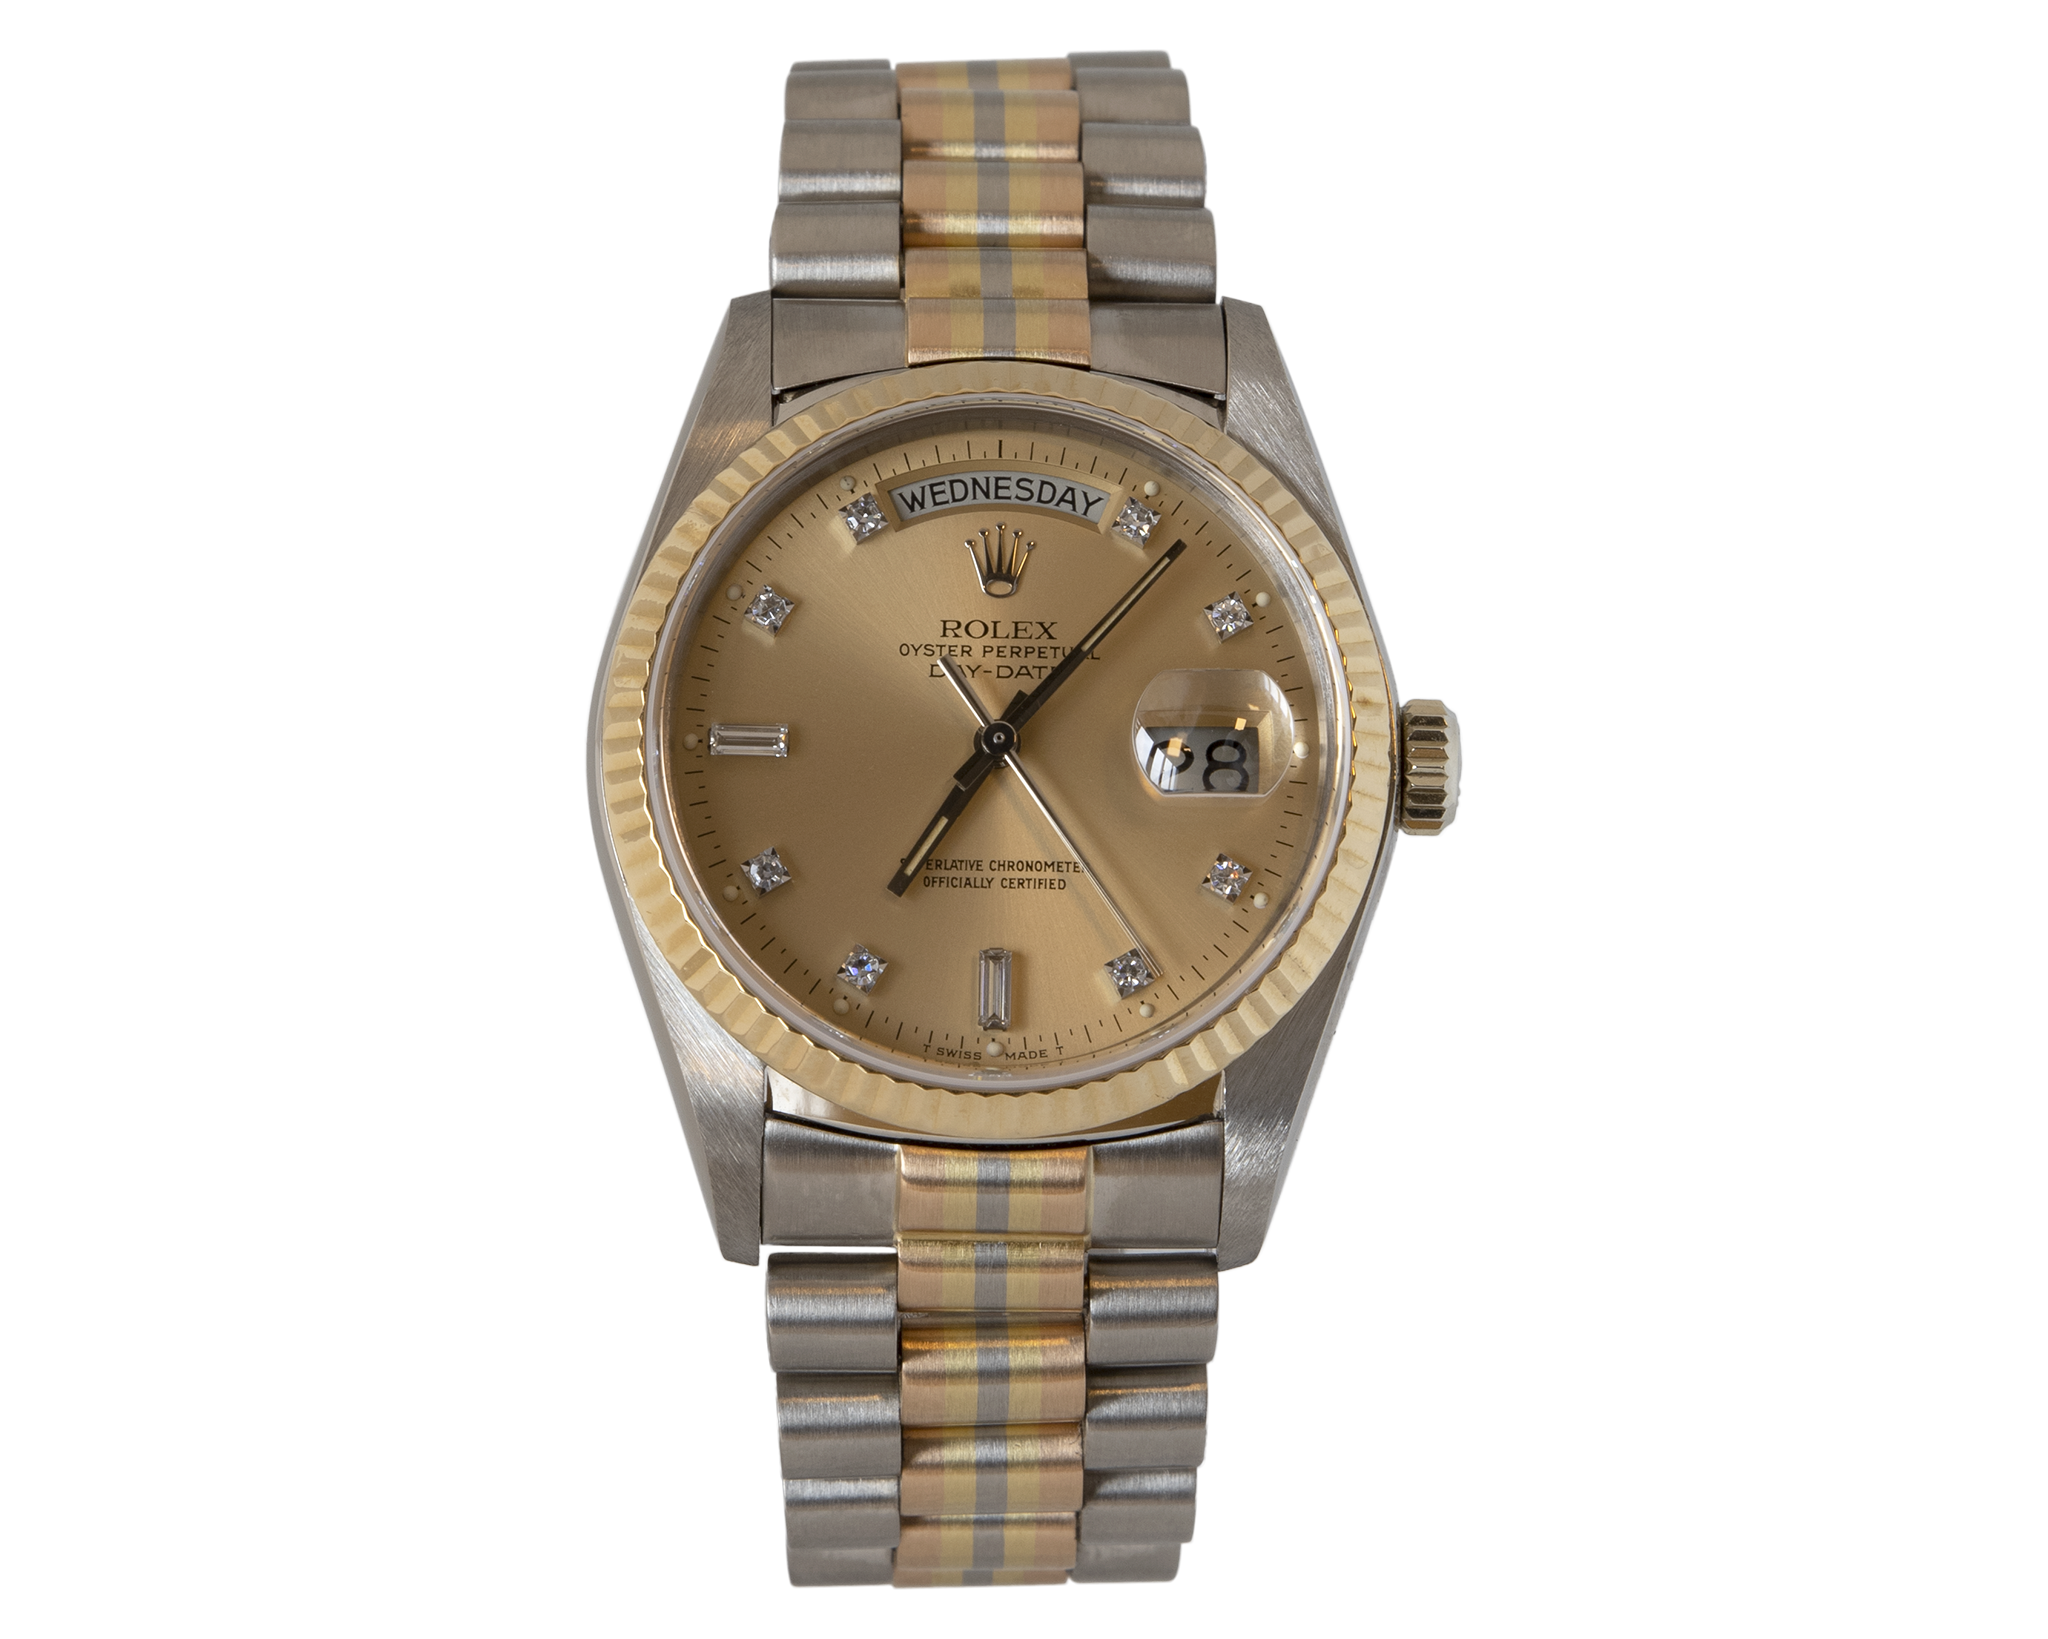 Rolex Day-Date 18039B 'Tridor' with champagne bronze diamond dial